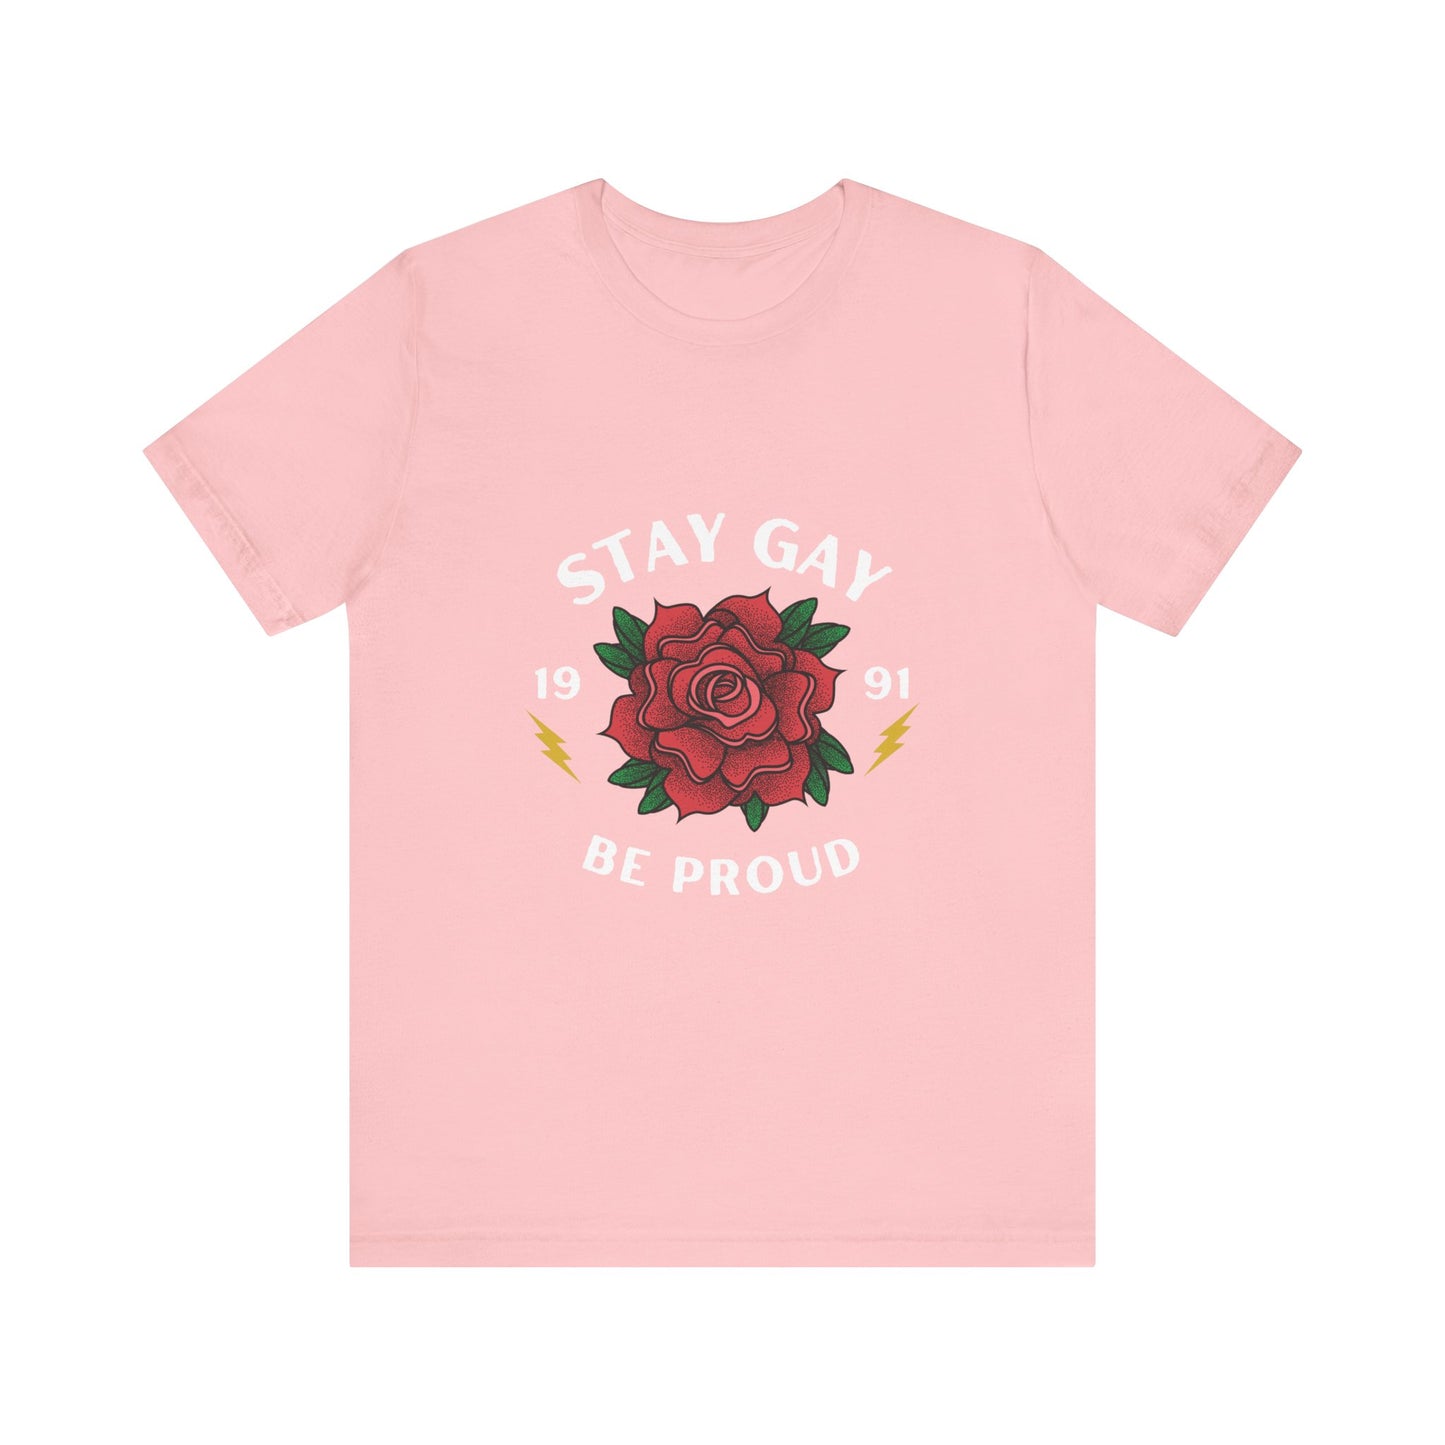 Stay Gay Be Proud T-Shirt